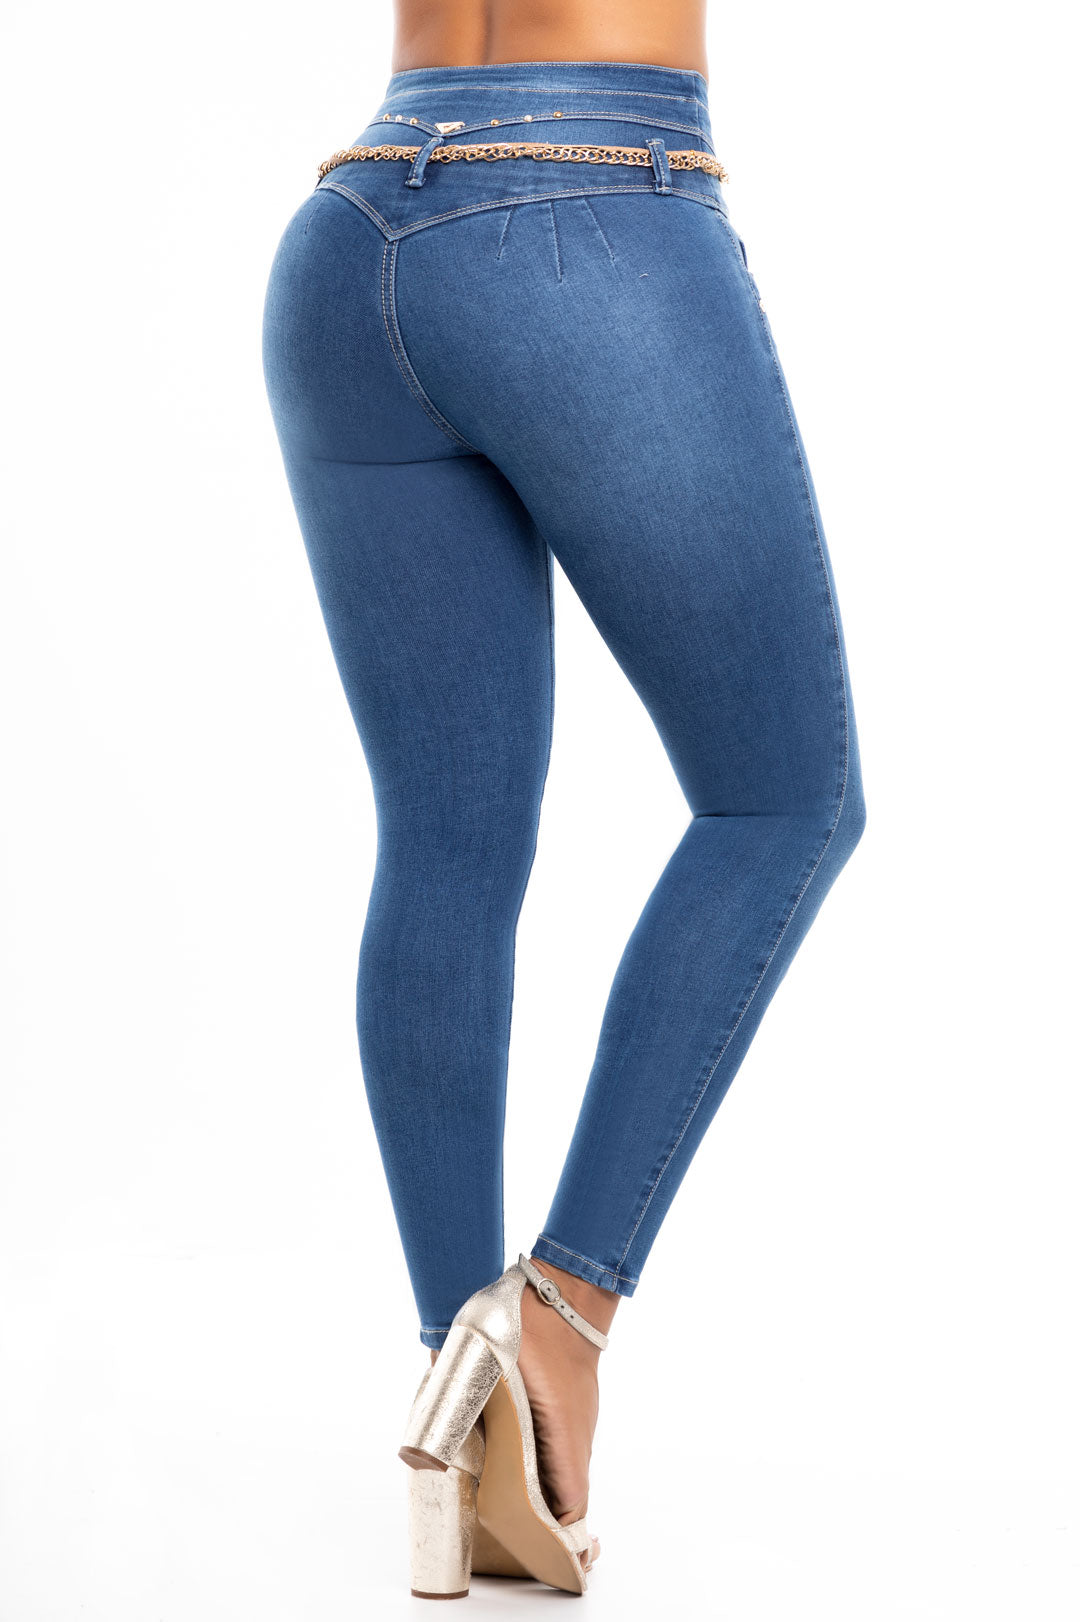 LOWELL JEANS COLOMBIANOS COLOMBIAN PUSH UP JEANS LEVANTA COLA BUTT LIFT -  Helia Beer Co